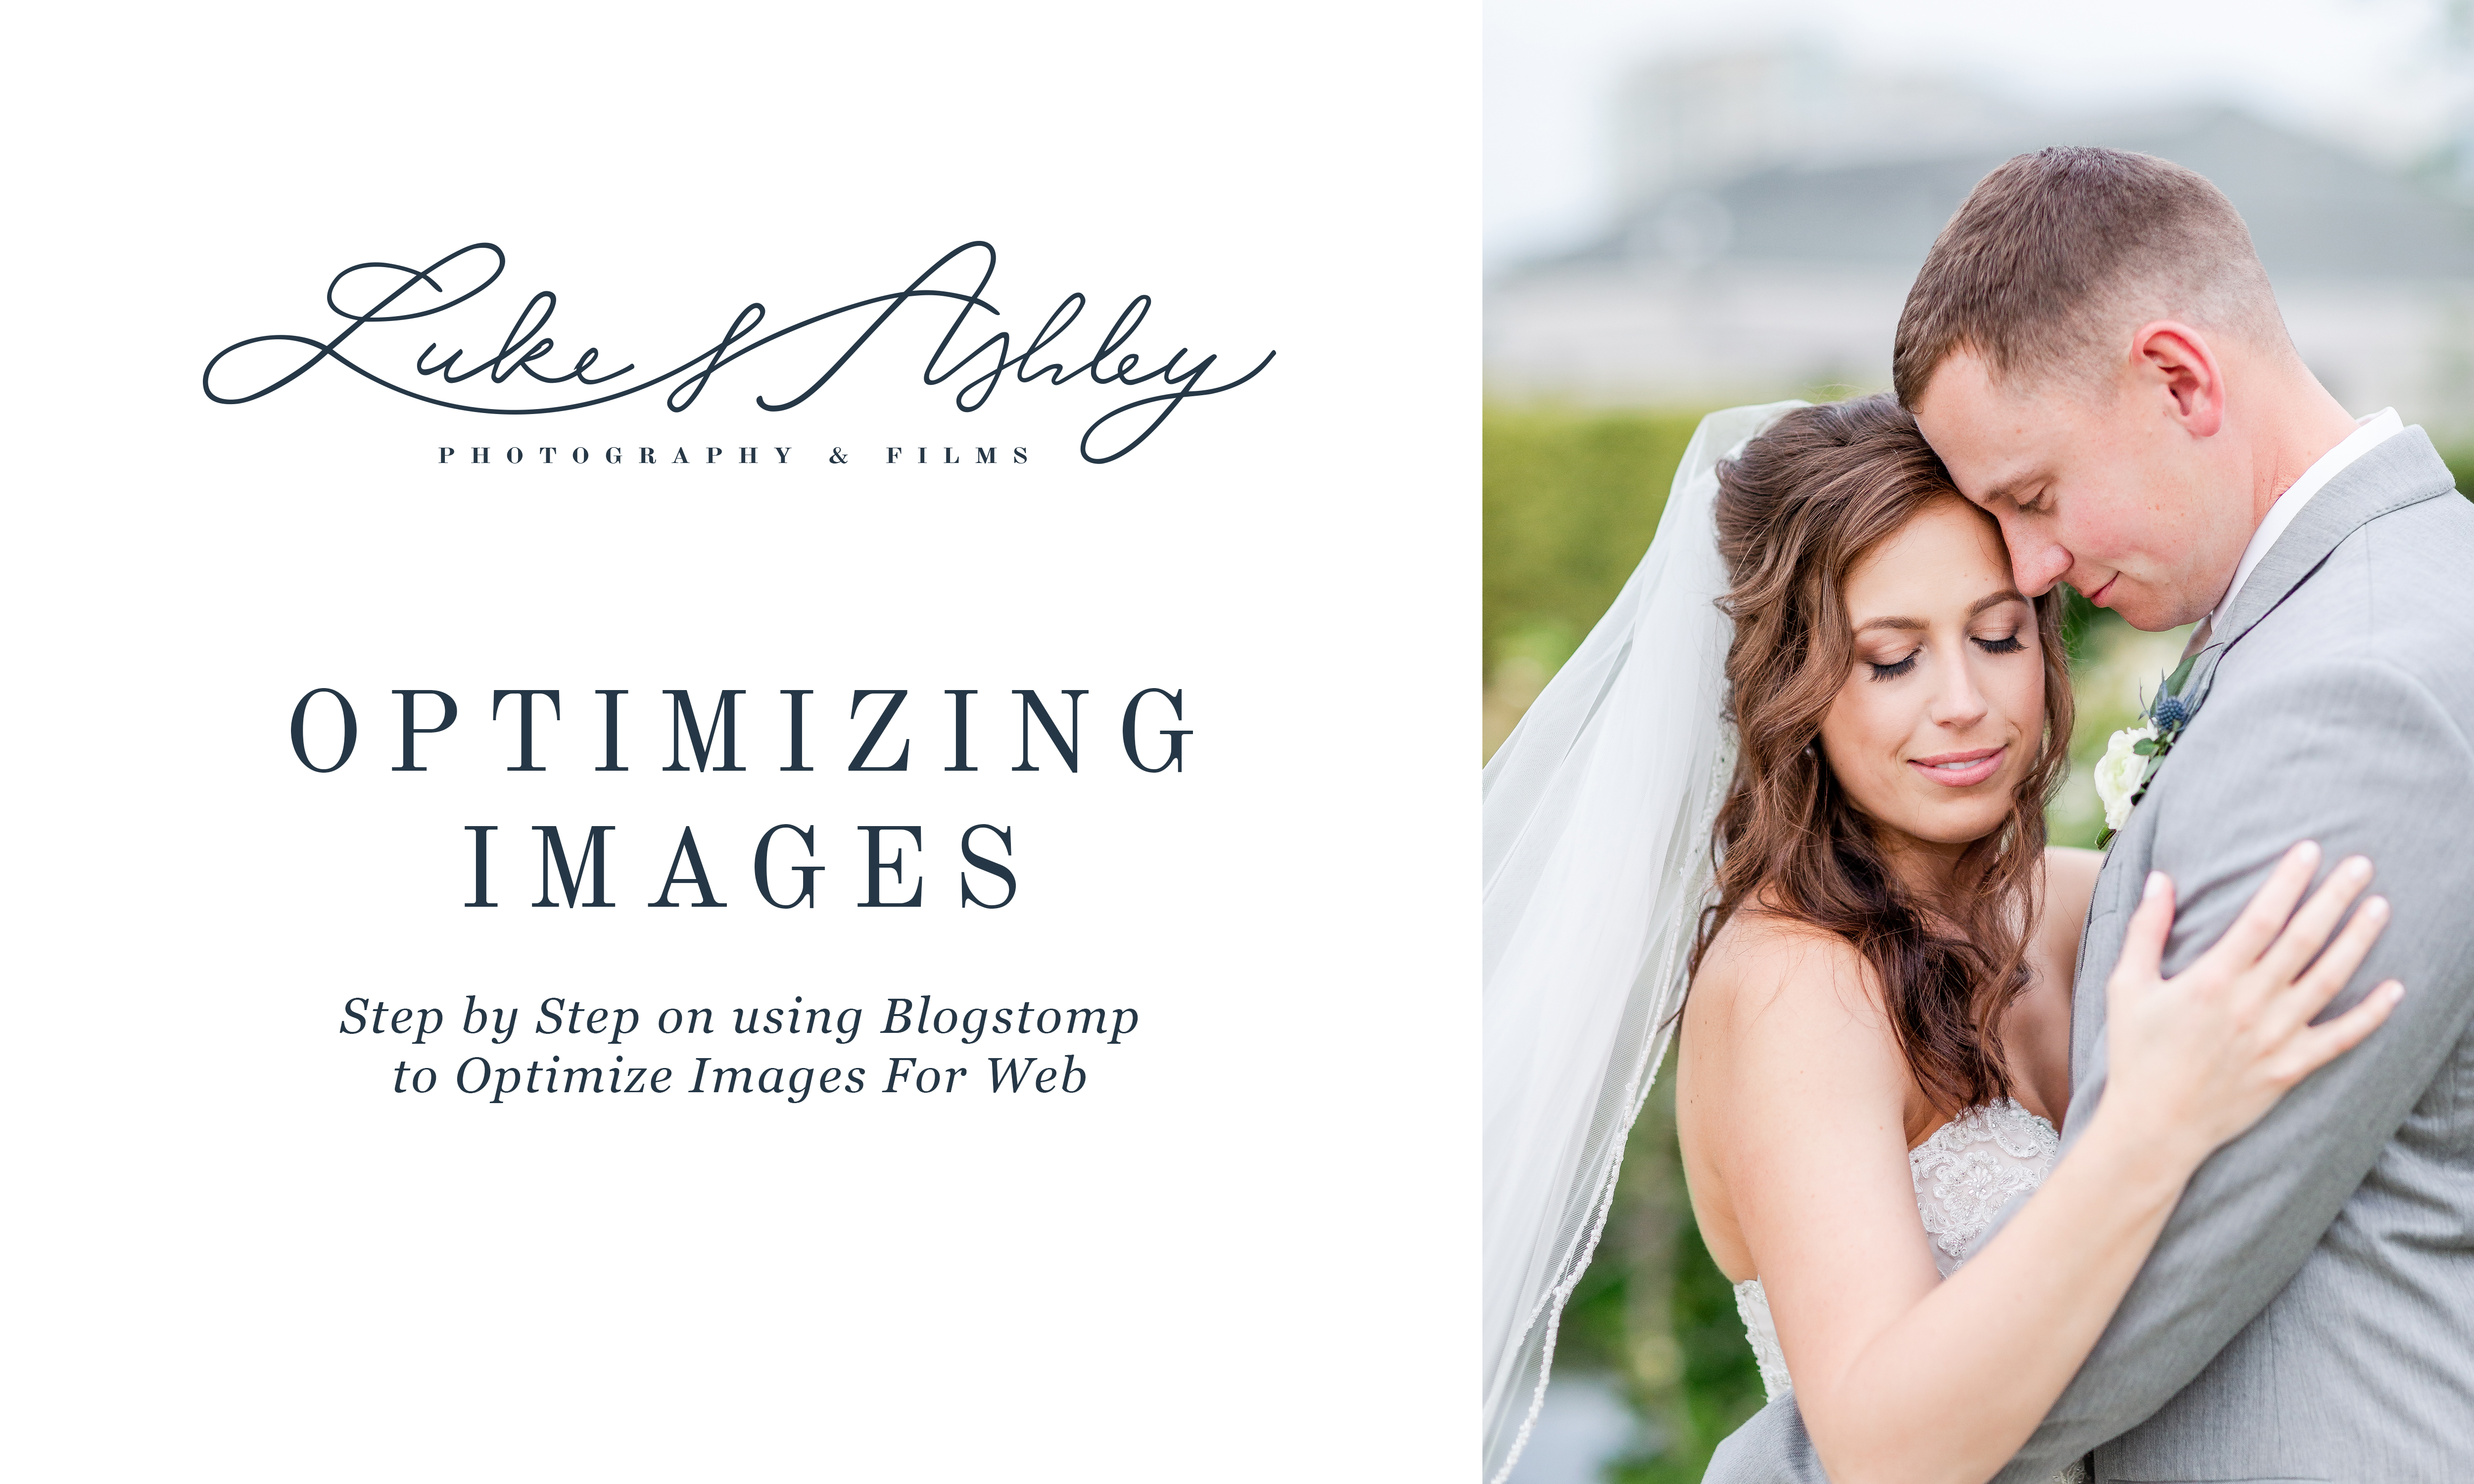 optimizing your images for the web a blog stomp overview by Luke and Ashley Photography